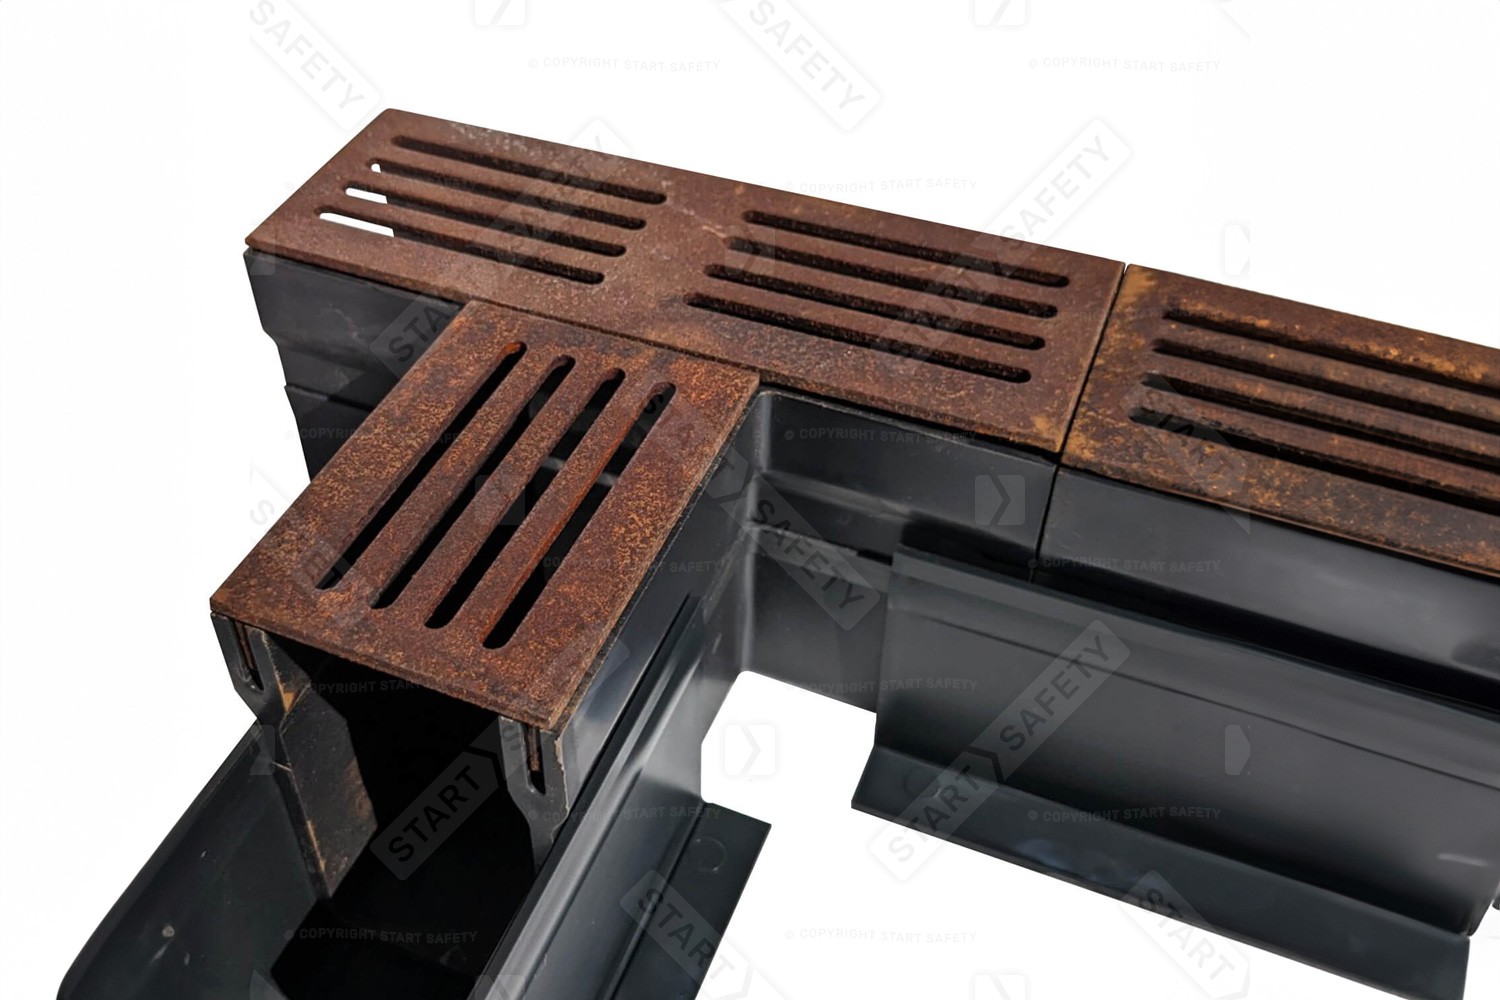 Installation of a Alusthetic Threshold Drainage Channel In Corten Steel